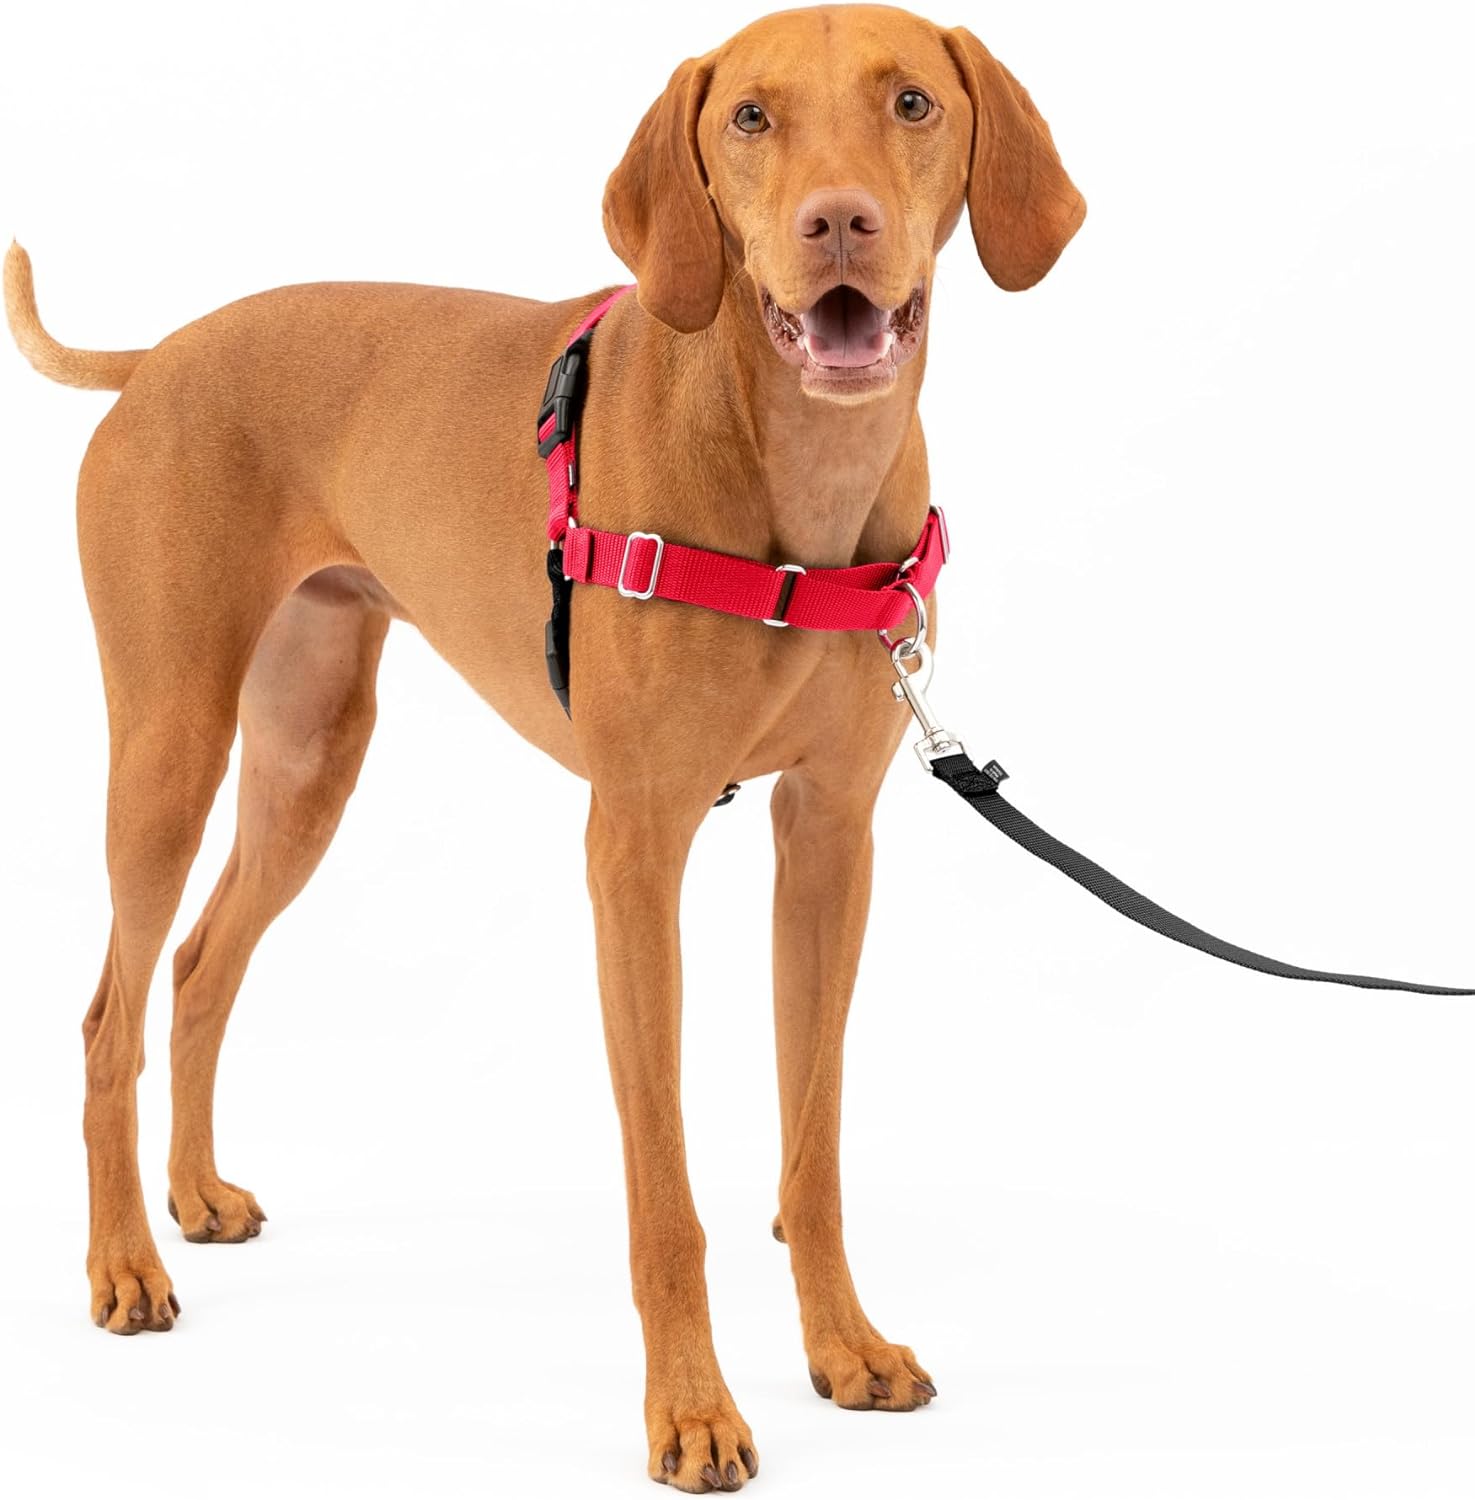 PetSafe Easy Walk No-Pull Dog Harness - The Ultimate Harness to Help Stop Pulling - Take Control  Teach Better Leash Manners - Helps Prevent Pets Pulling on Walks - Medium, Apple Green/Gray